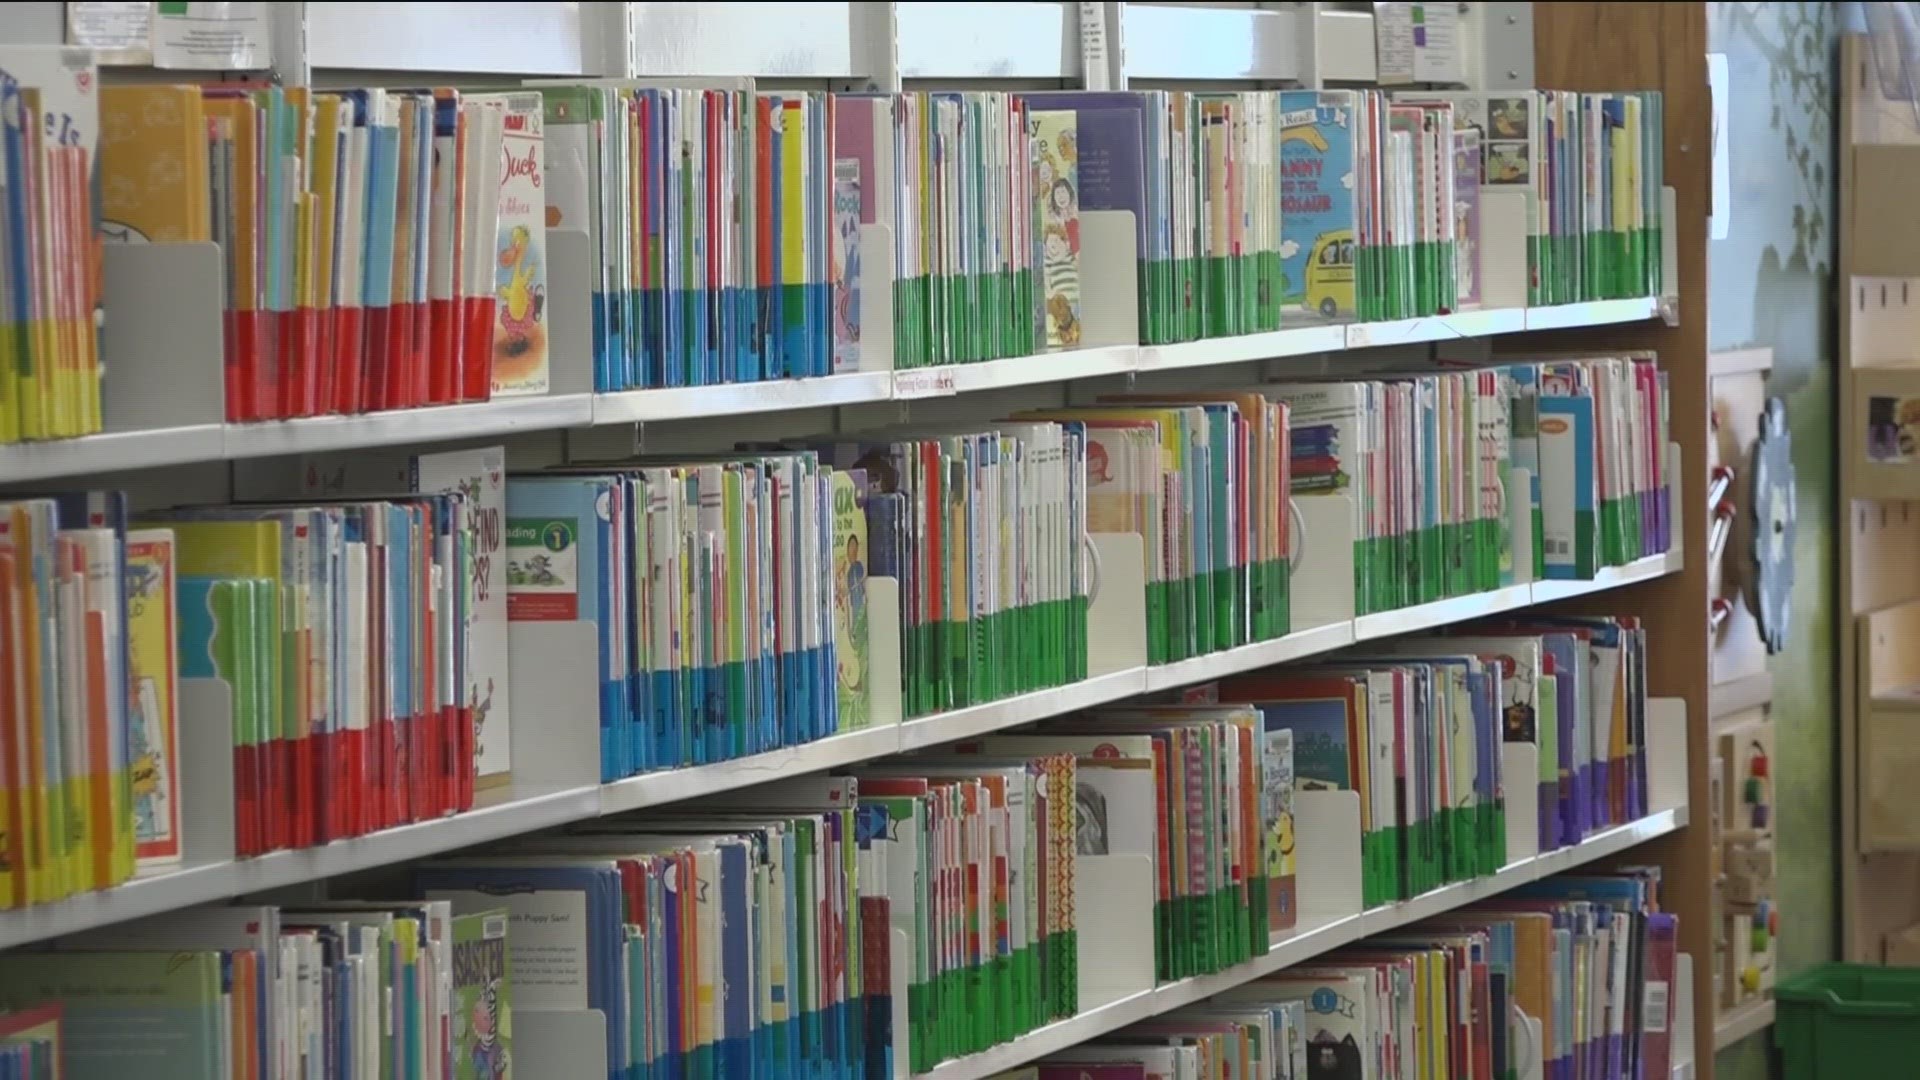 Our team was asked if schools can ban books from shelves, turns out there's a process for some districts